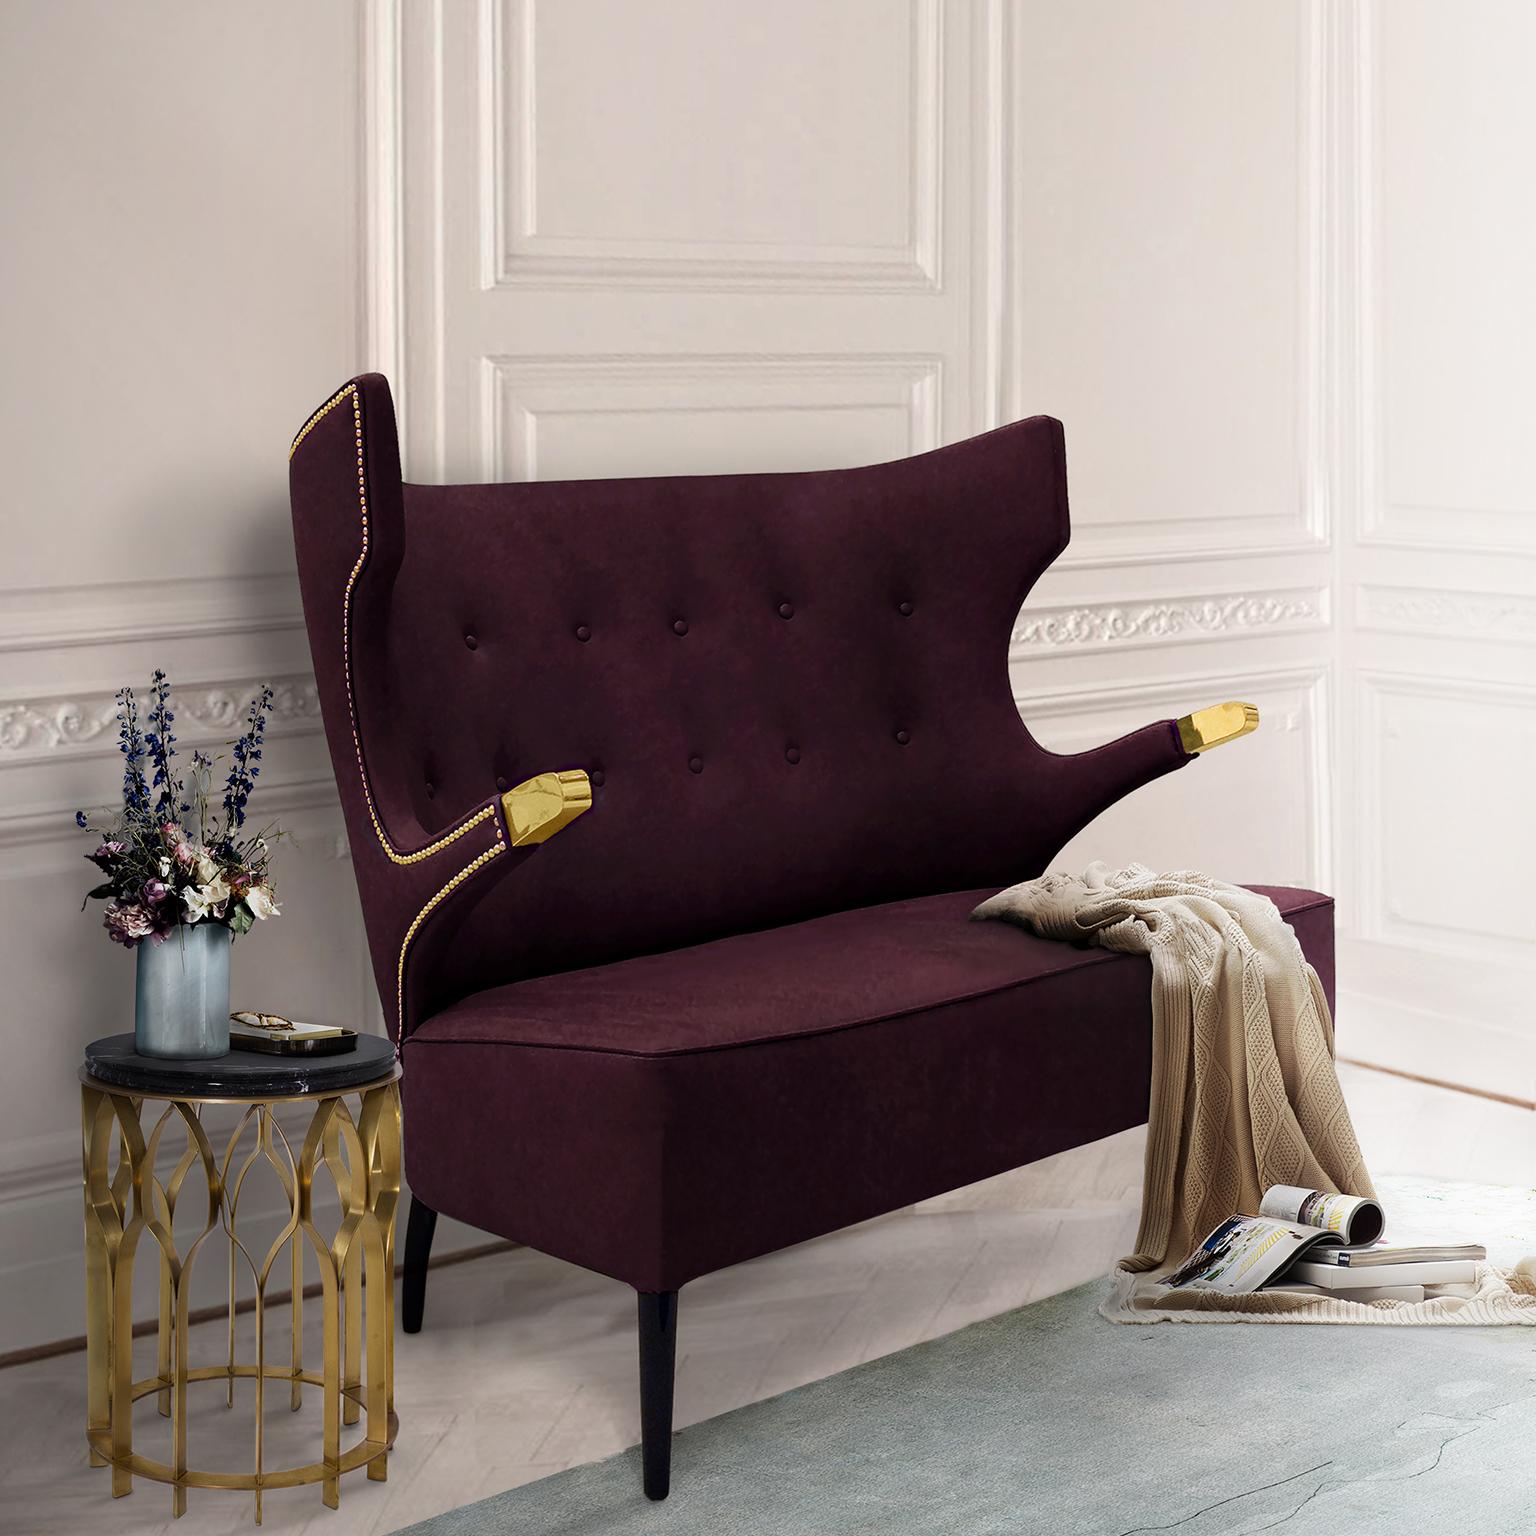 SIKA is a blend of strength & elegance, inspired in a deer specie rooted in Japan – where it is considered to be sacred. The most distinctive features are its reddish leather covered by brass tackles & the imposing arms & headrest, resembling the